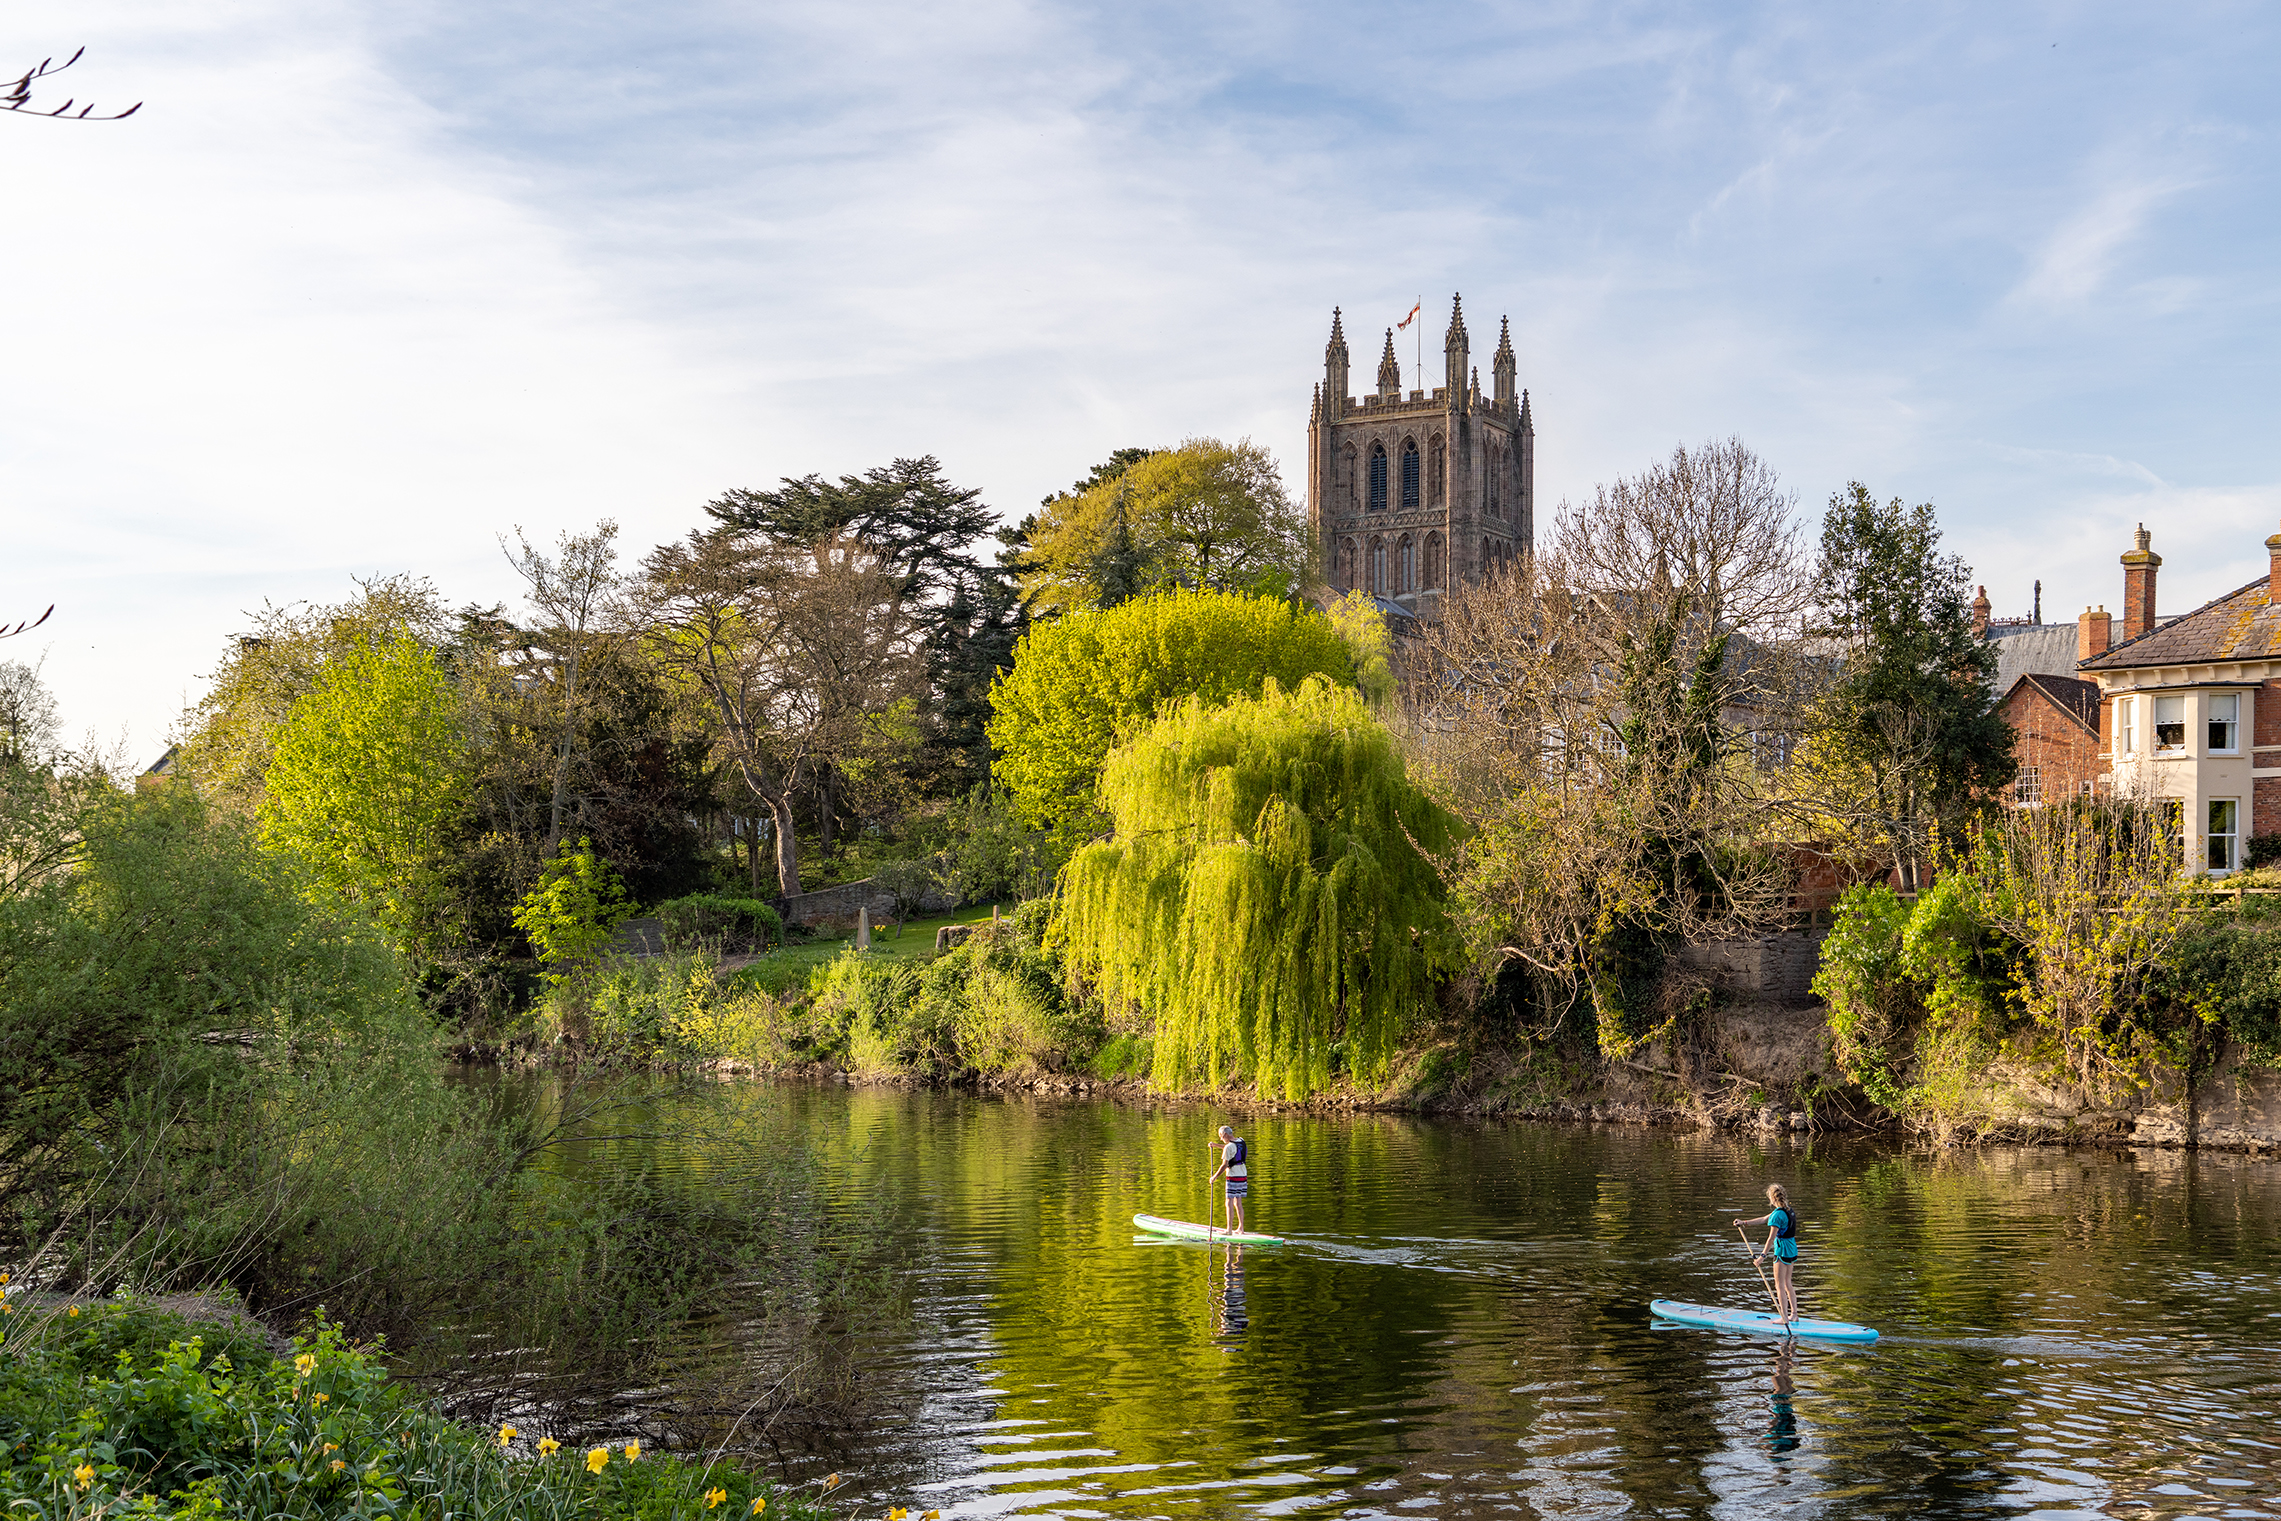 View towards Hereford Cathedral across river with paddleboarders